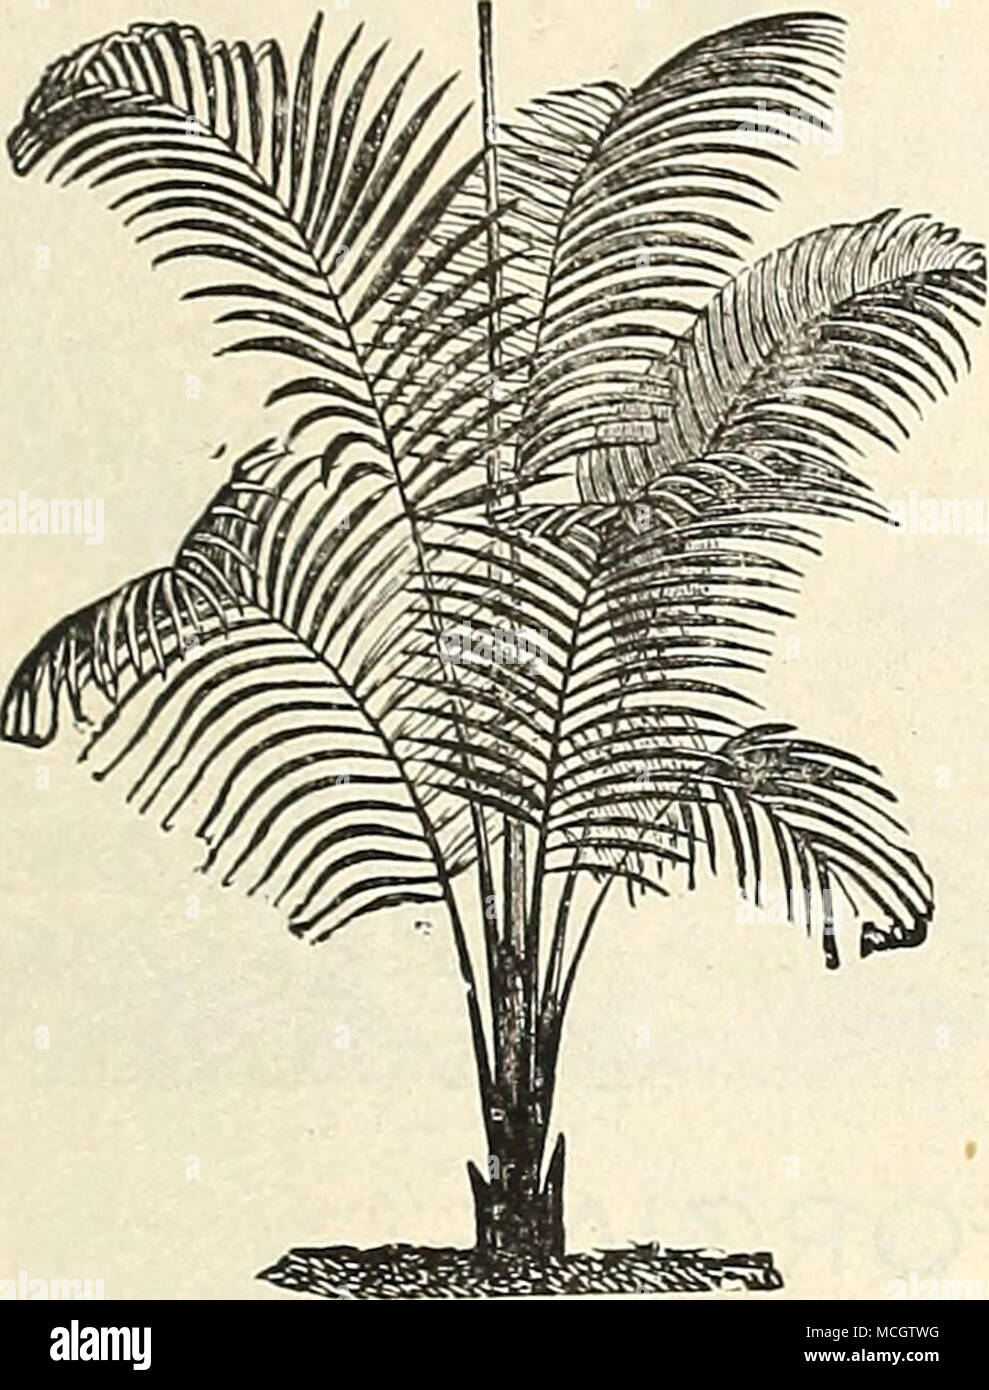 . Chamserops Excelsa. A handsome Fan Palm, of rapid, easy culture. 50 cts. Cocos Weddelliana. The most relegant and graceful of all the smaller Palms. The Cocos are admirable for fern dishes, as they are of slow growth and maintain their beauty for a long time. 50 cts. to fl.OO each. Cocos Weddelliana. Areca Sanderiana. A beautiful new species, with deep glossy green foliage and red stems. 51.50 to $3.00 each. Areca Sapida. A strong upright growing variety with dark green feathered foliage. $1.00 to $3.00 each. Areca Verschaffelti. One of the most elegant varieties, with dark shining green fol Stock Photo